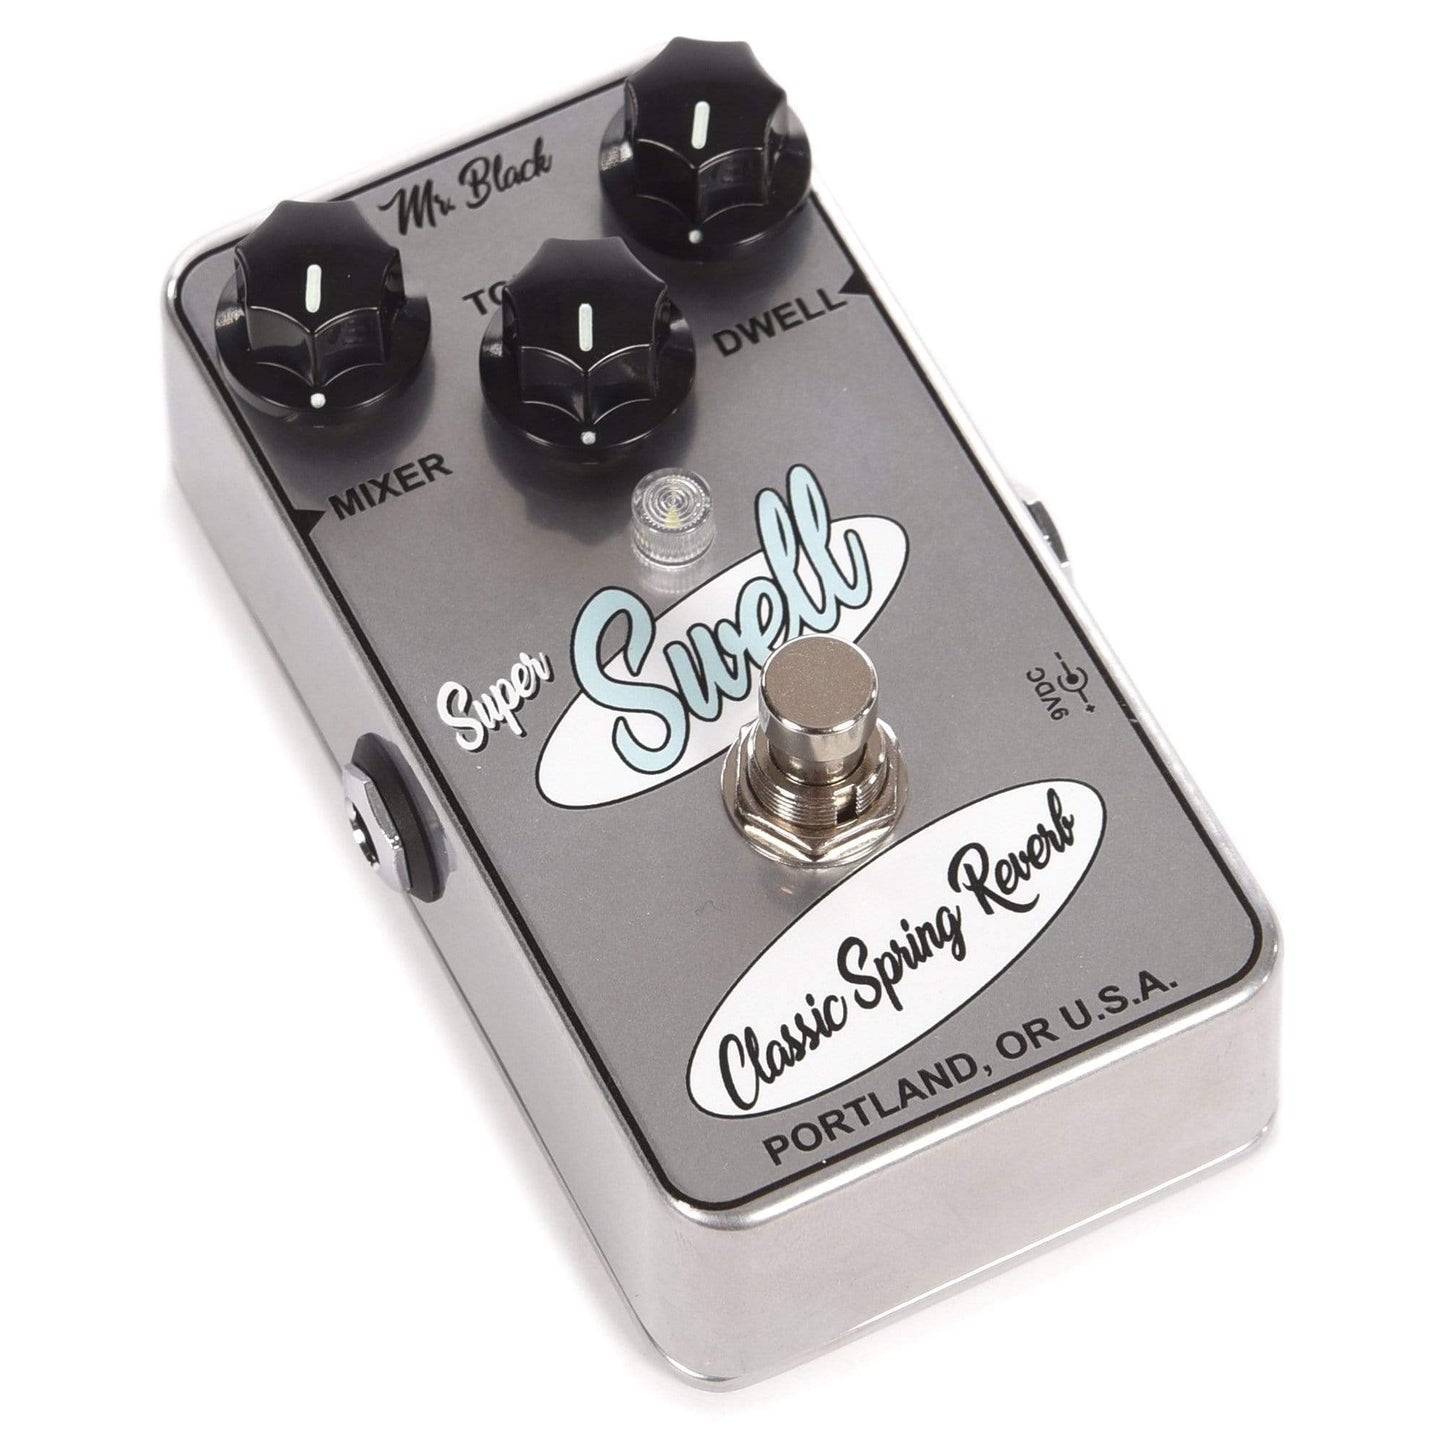 Mr. Black Super Swell Classic Spring Reverb Effects and Pedals / Reverb